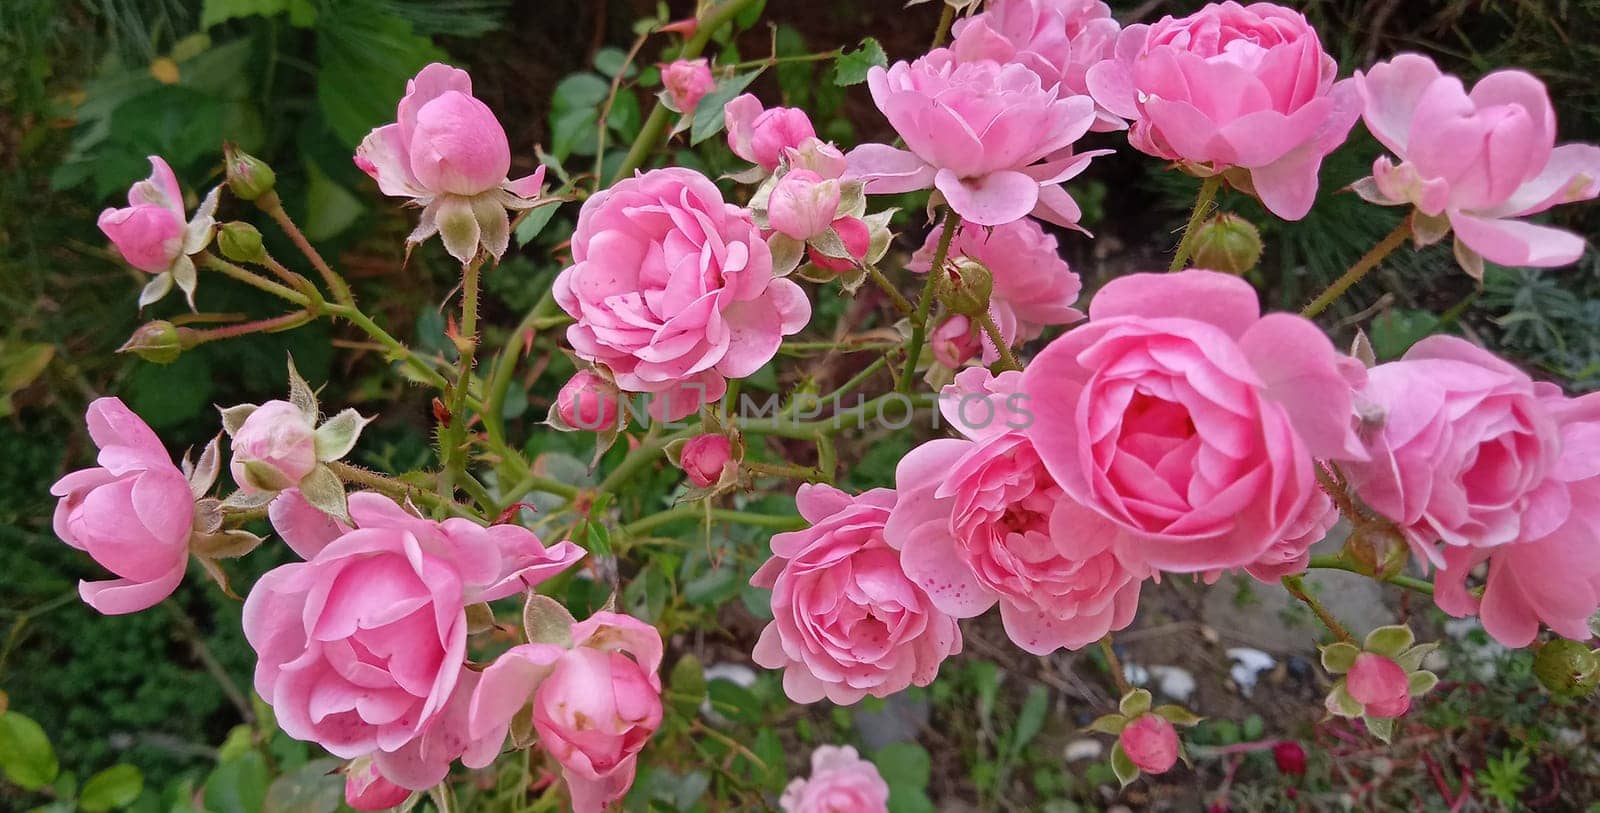 A lot of small pink roses on bush closeup in sunset garden. Pink roses bushes blooming